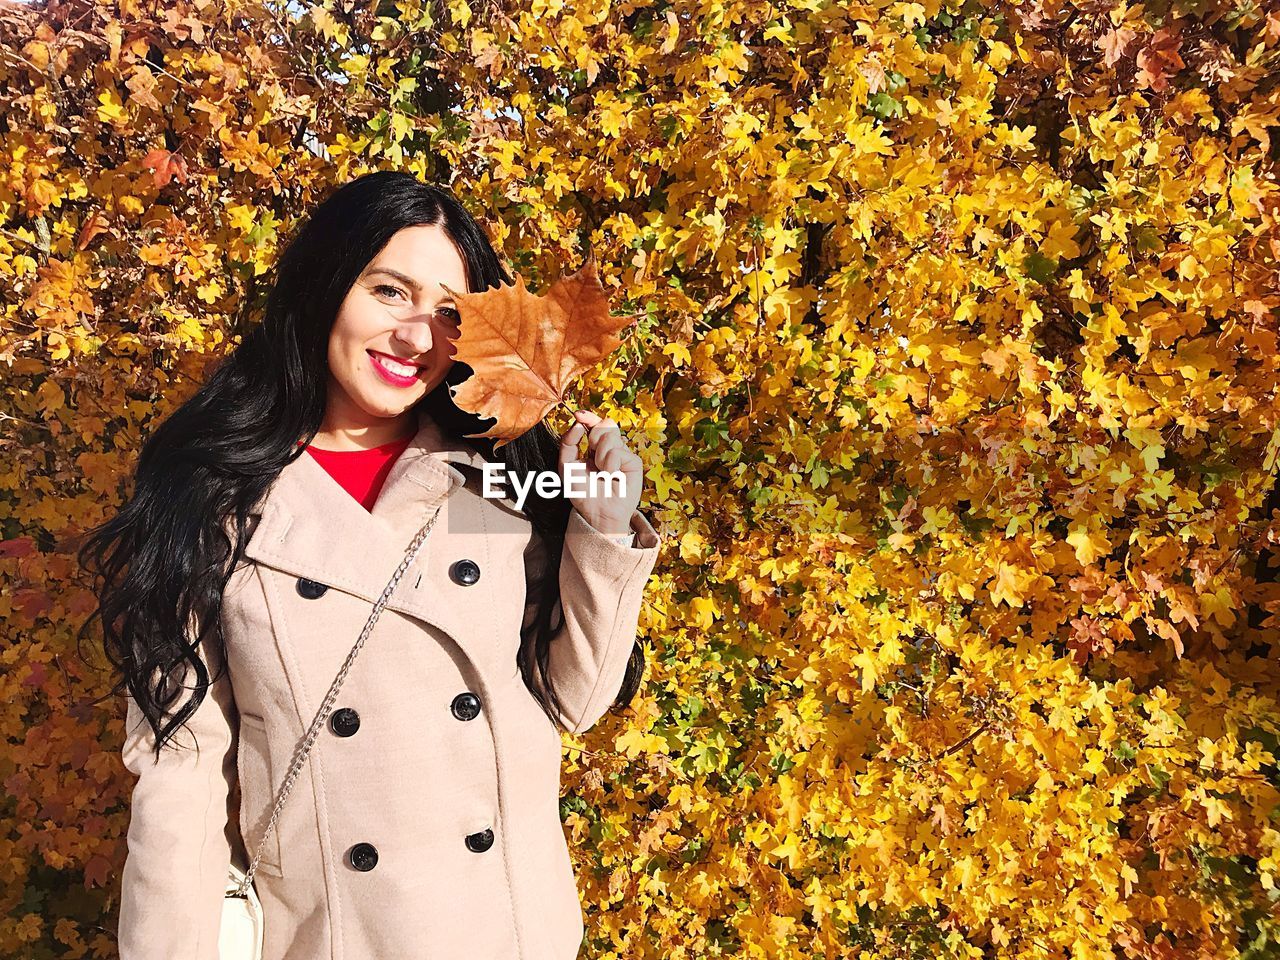 Smiling young woman holding maple leaf while standing against yellow autumn leaves